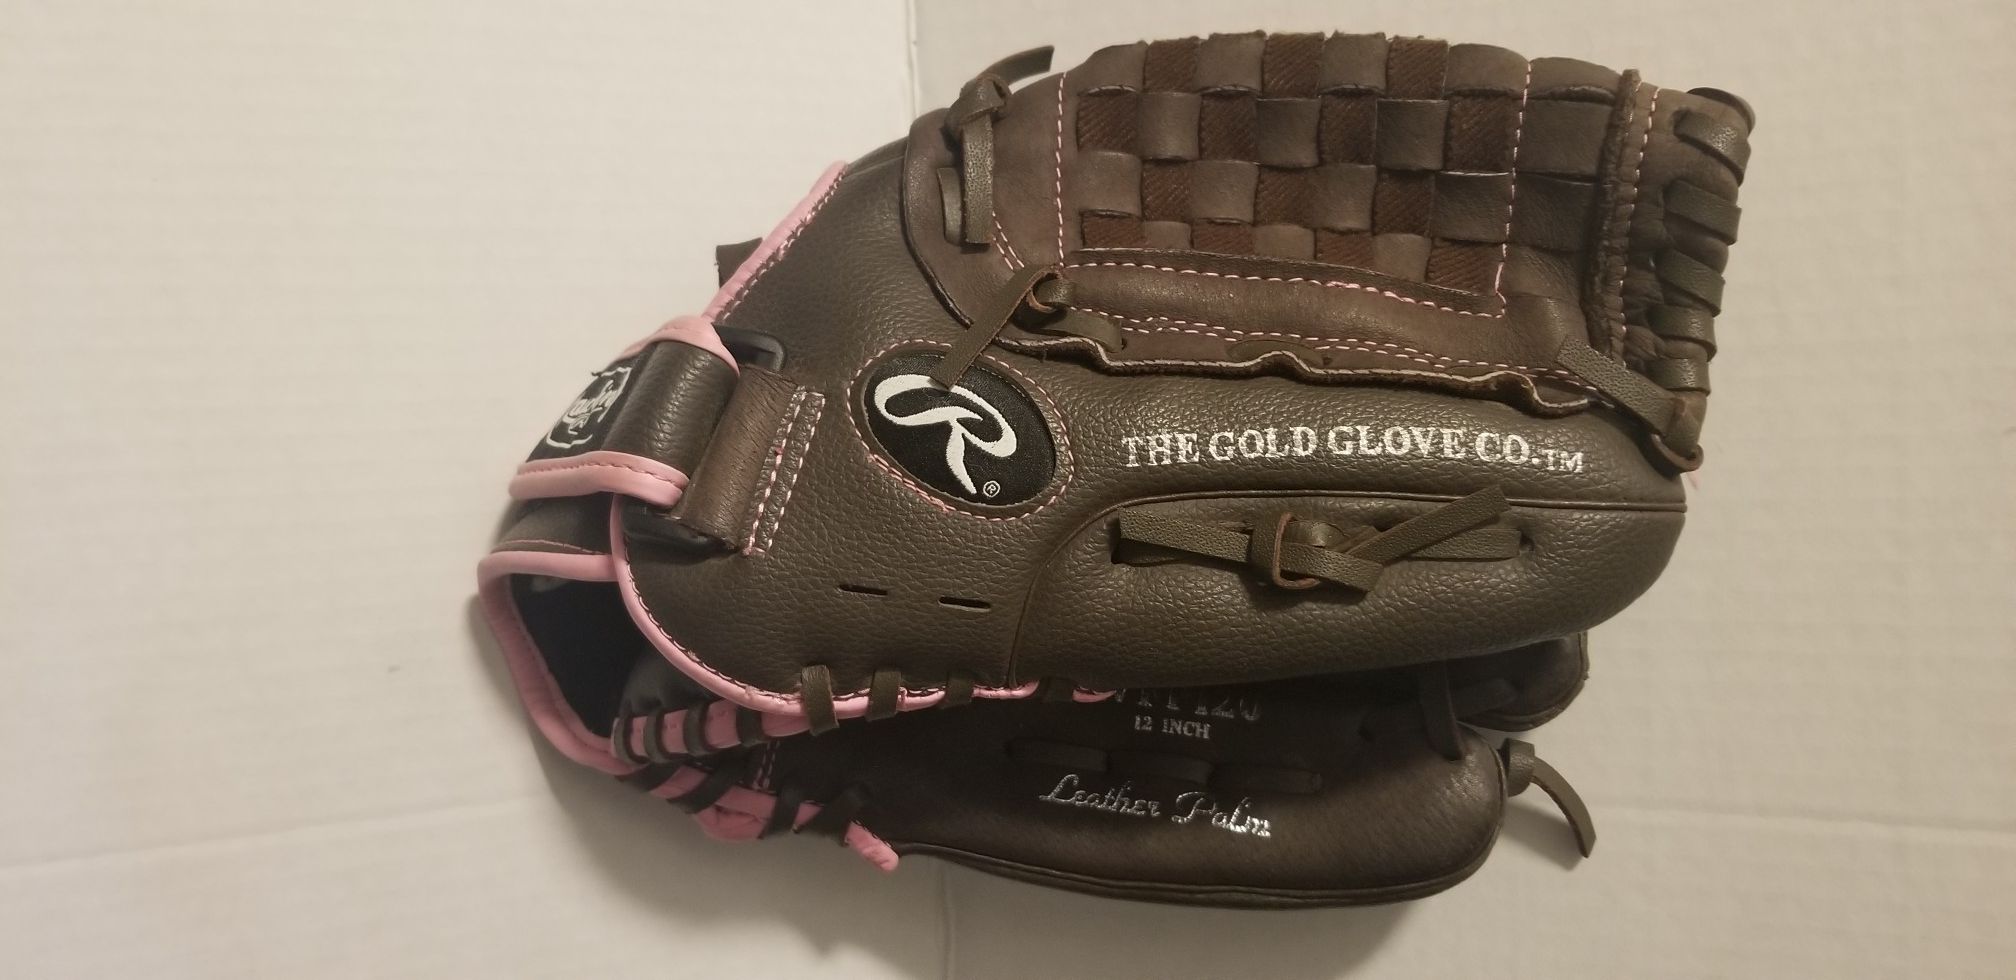 *HOLD FOR MONALE* Women's fast pitch softball glove 12 inch